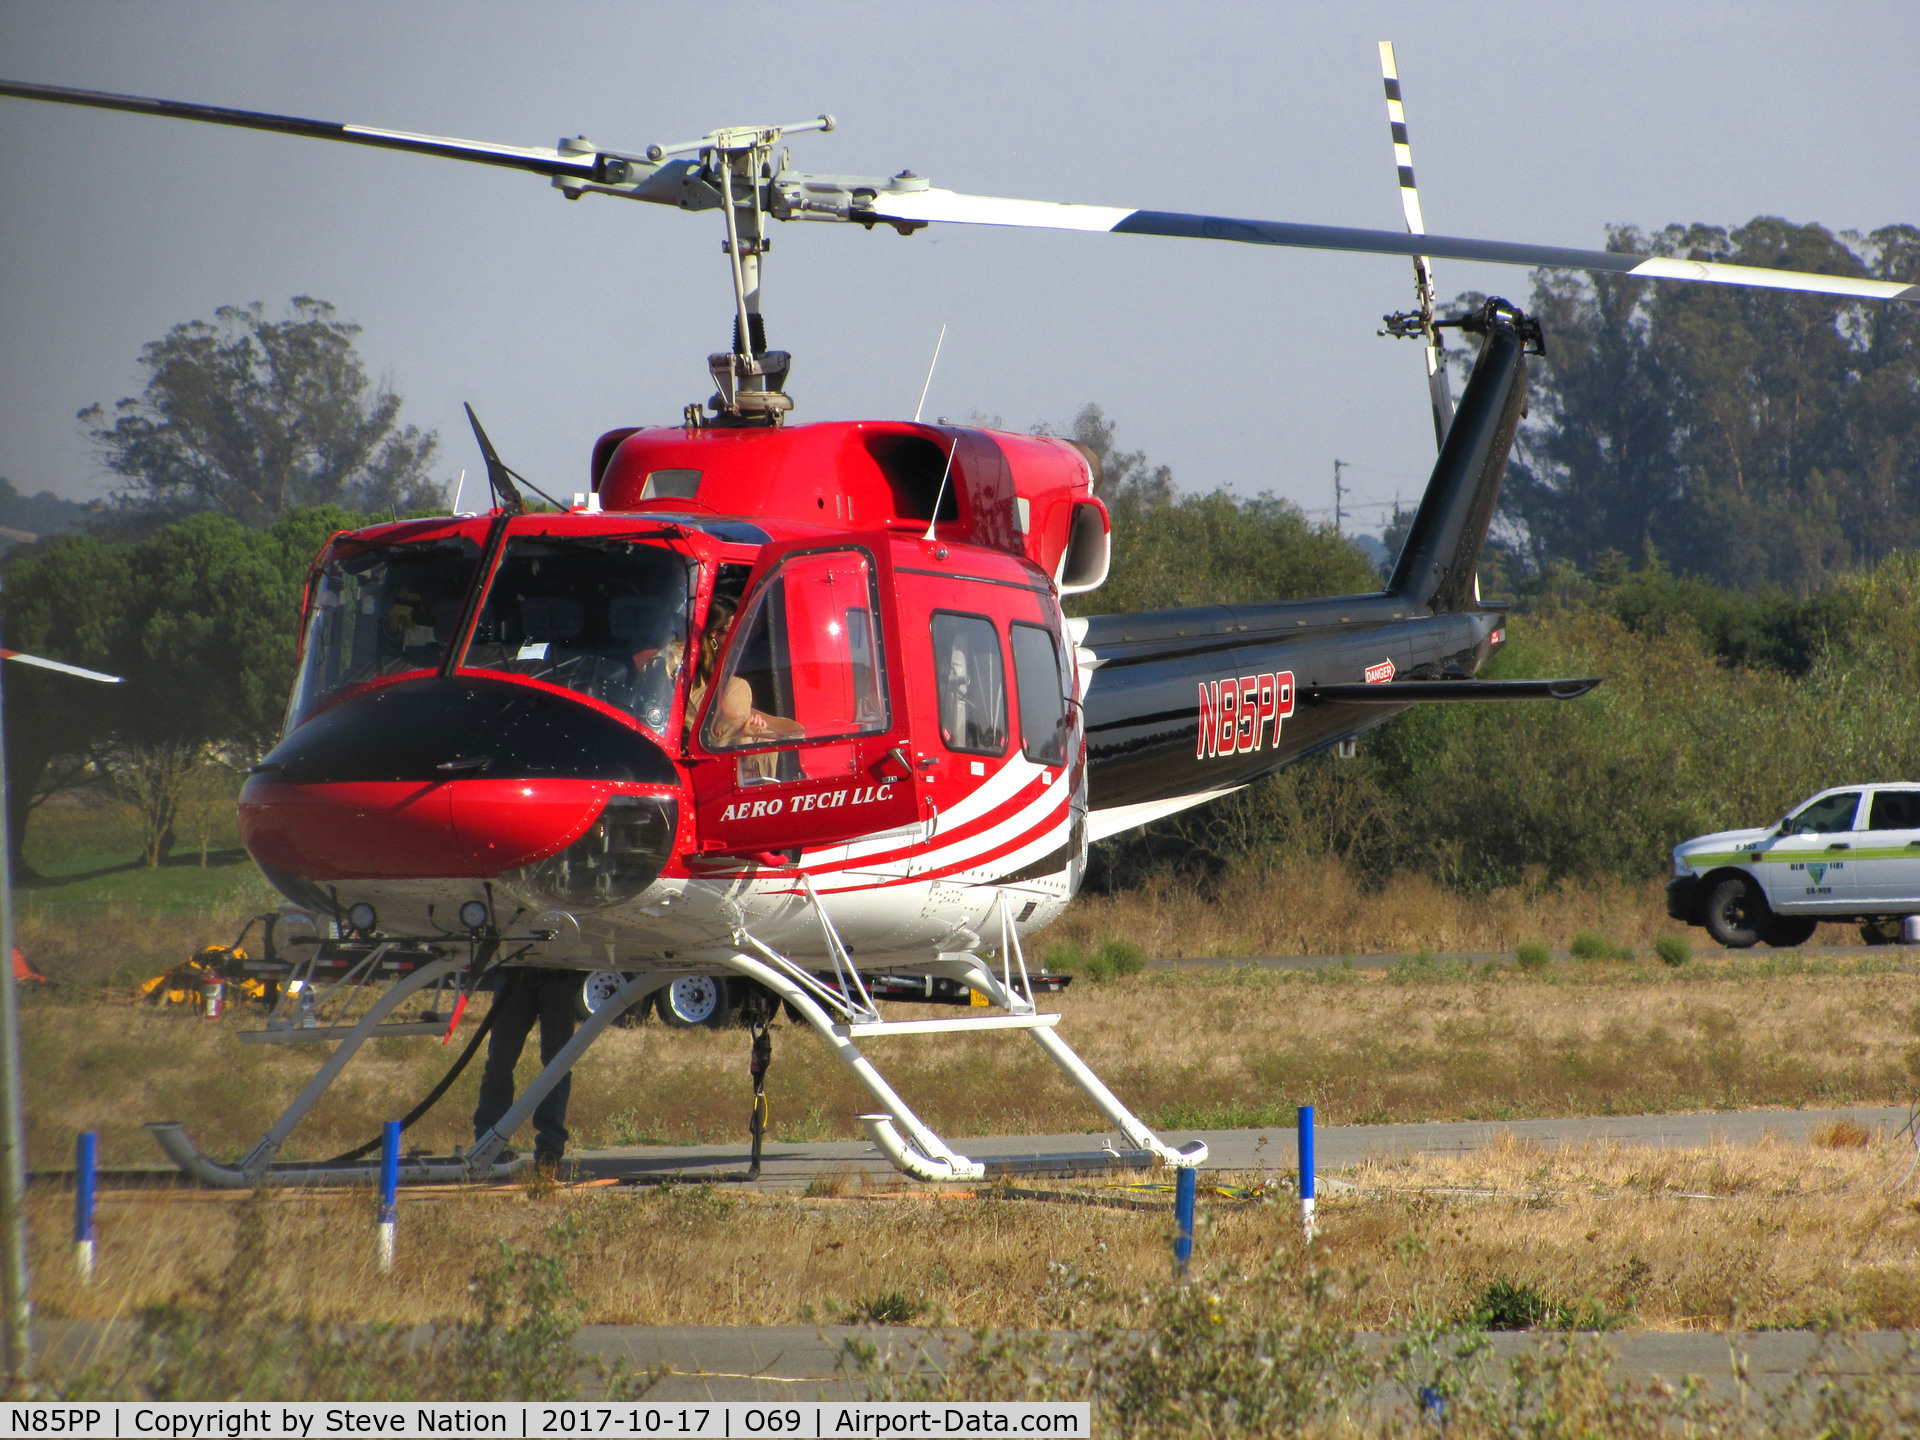 N85PP, 1985 Bell 212 C/N 31266, Aero Tech LLC Clovis, NM) 1985 Bell 212 after returning from water drops on the devastating October 2017 Northern California wildfires @ Petaluma Muni Airport, CA which was closed to fixed wing ops for 10 days to support nearly two dozen helicopters